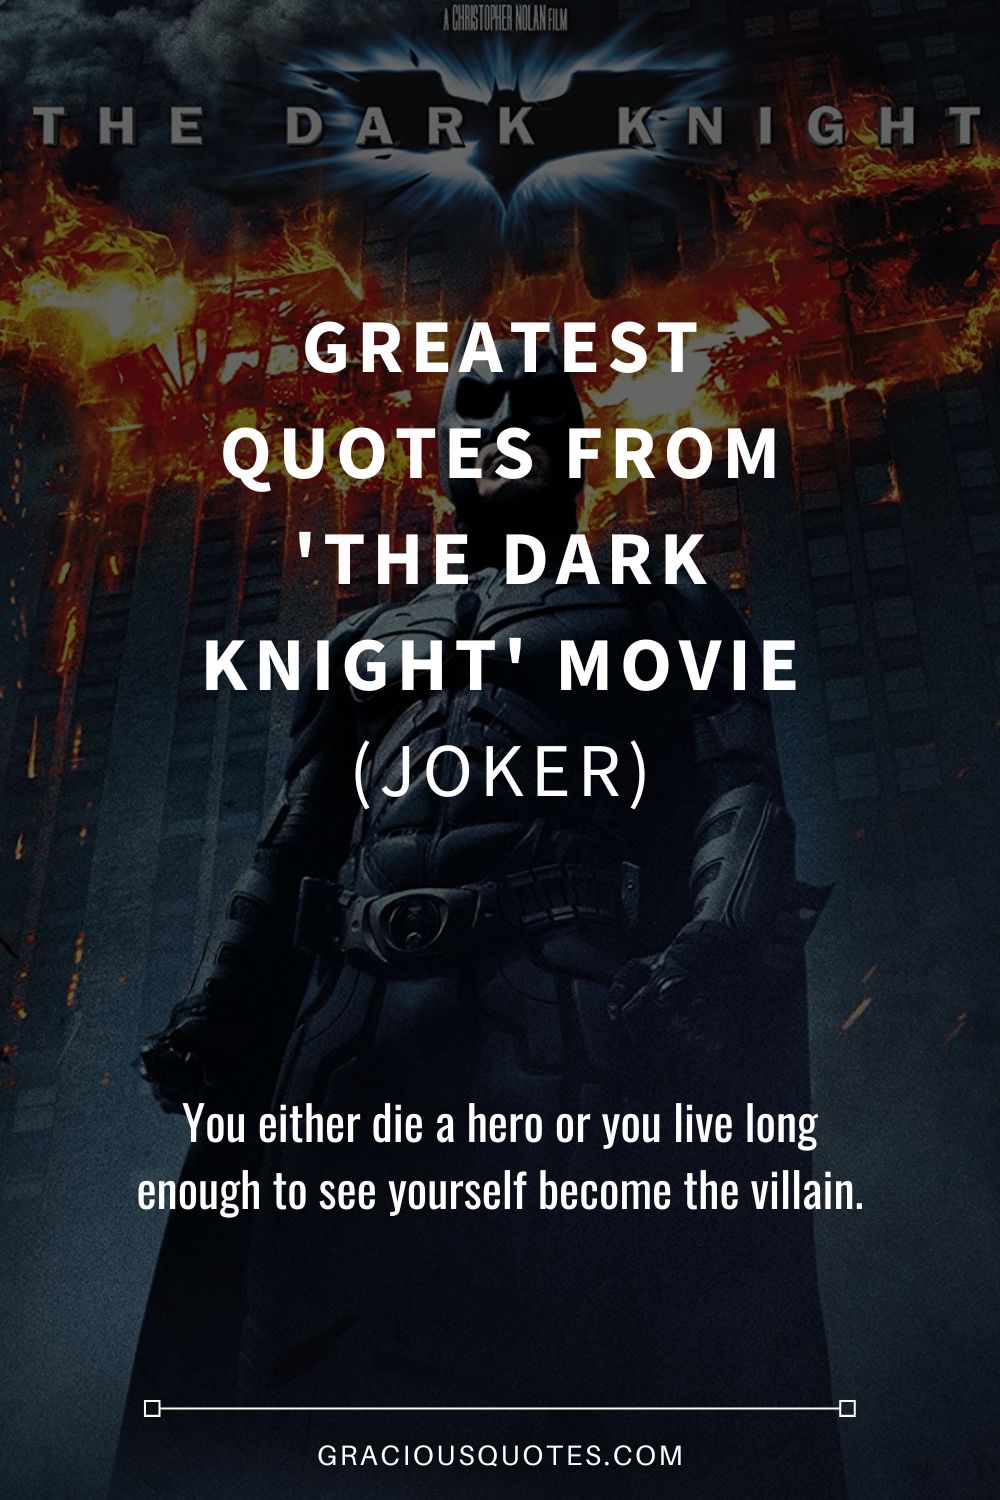 Greatest Quotes from 'The Dark Knight' Movie (JOKER) - Gracious Quotes